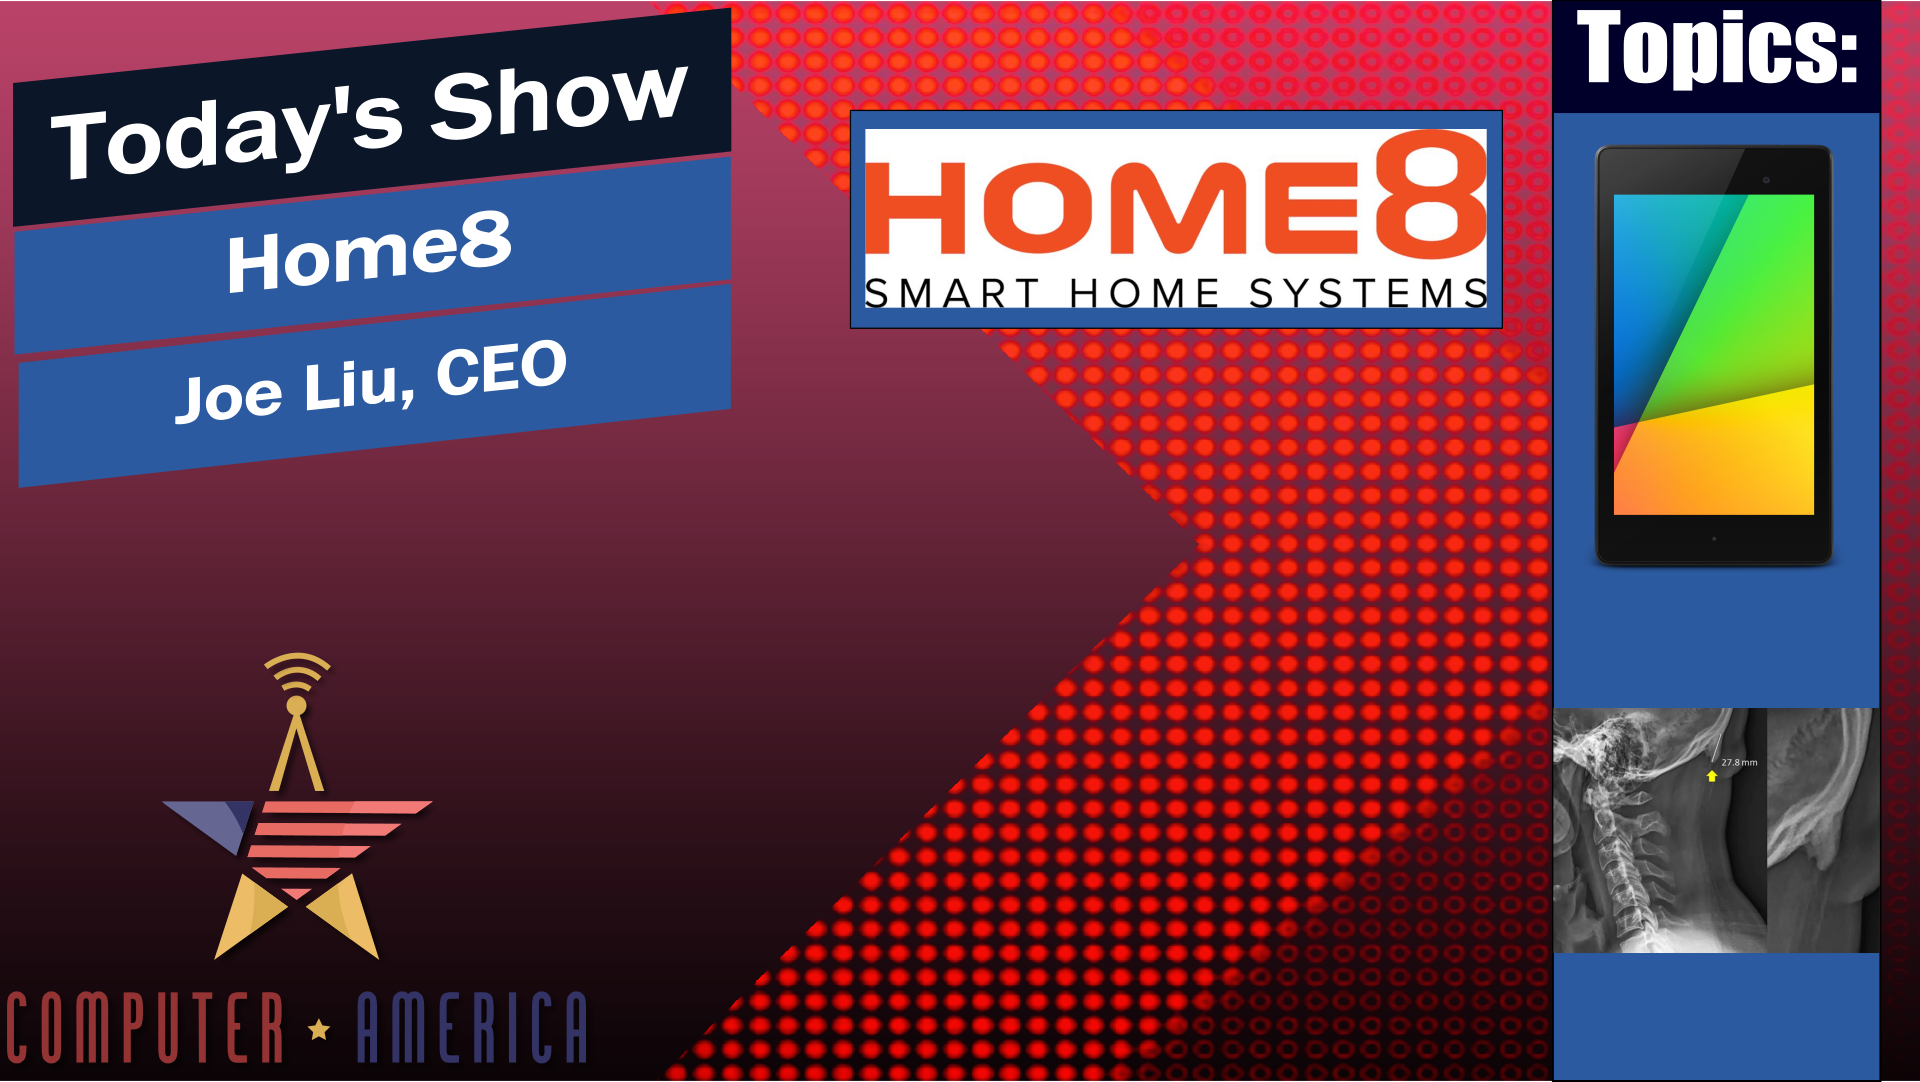 Home8 Interview, Talking Home Security, Cell Phone Horns, Google Tablet Nix